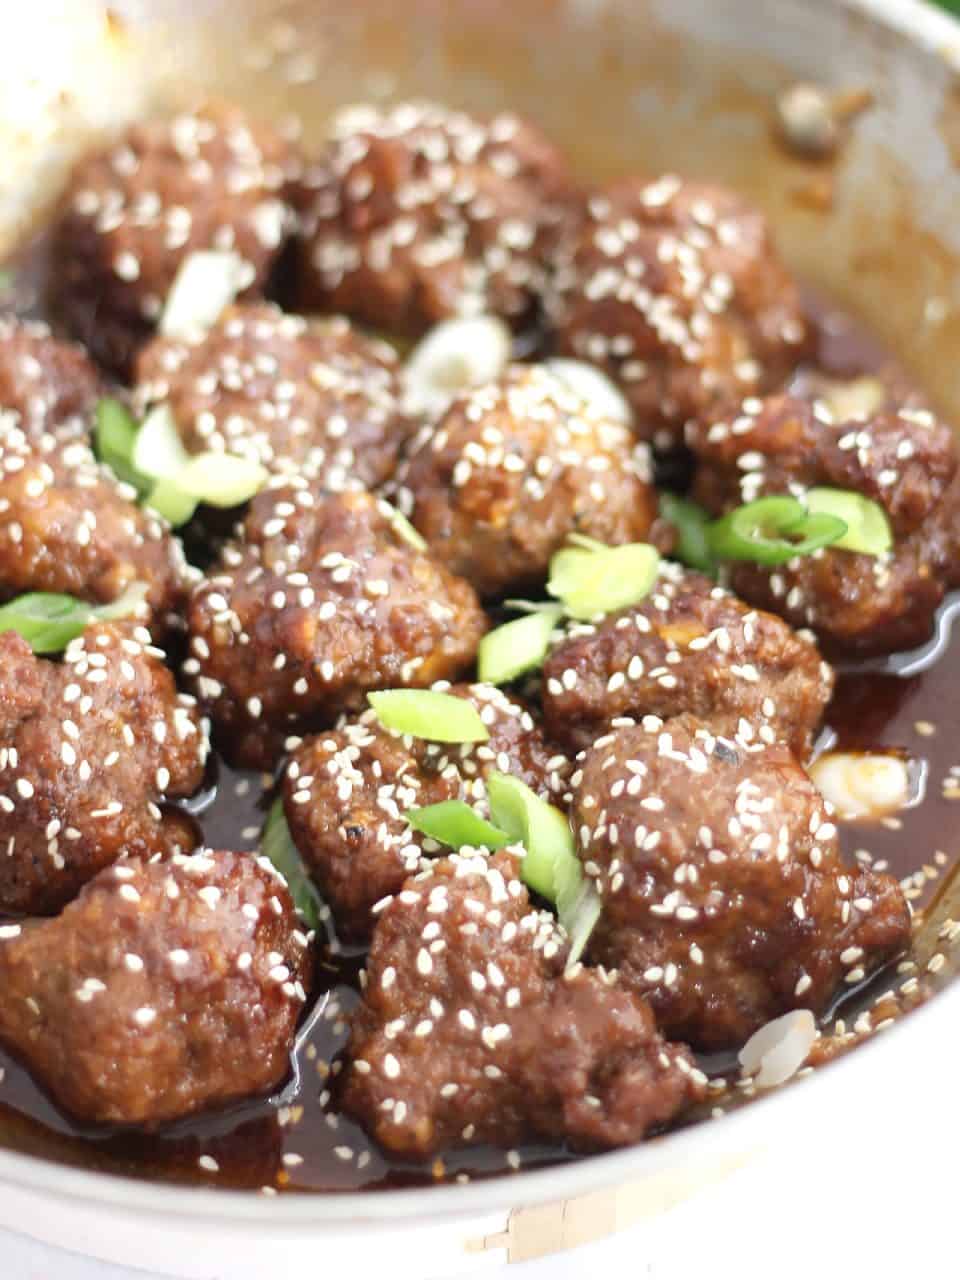 Close up of the cooked meatballs tossed in sauce in a skillet.